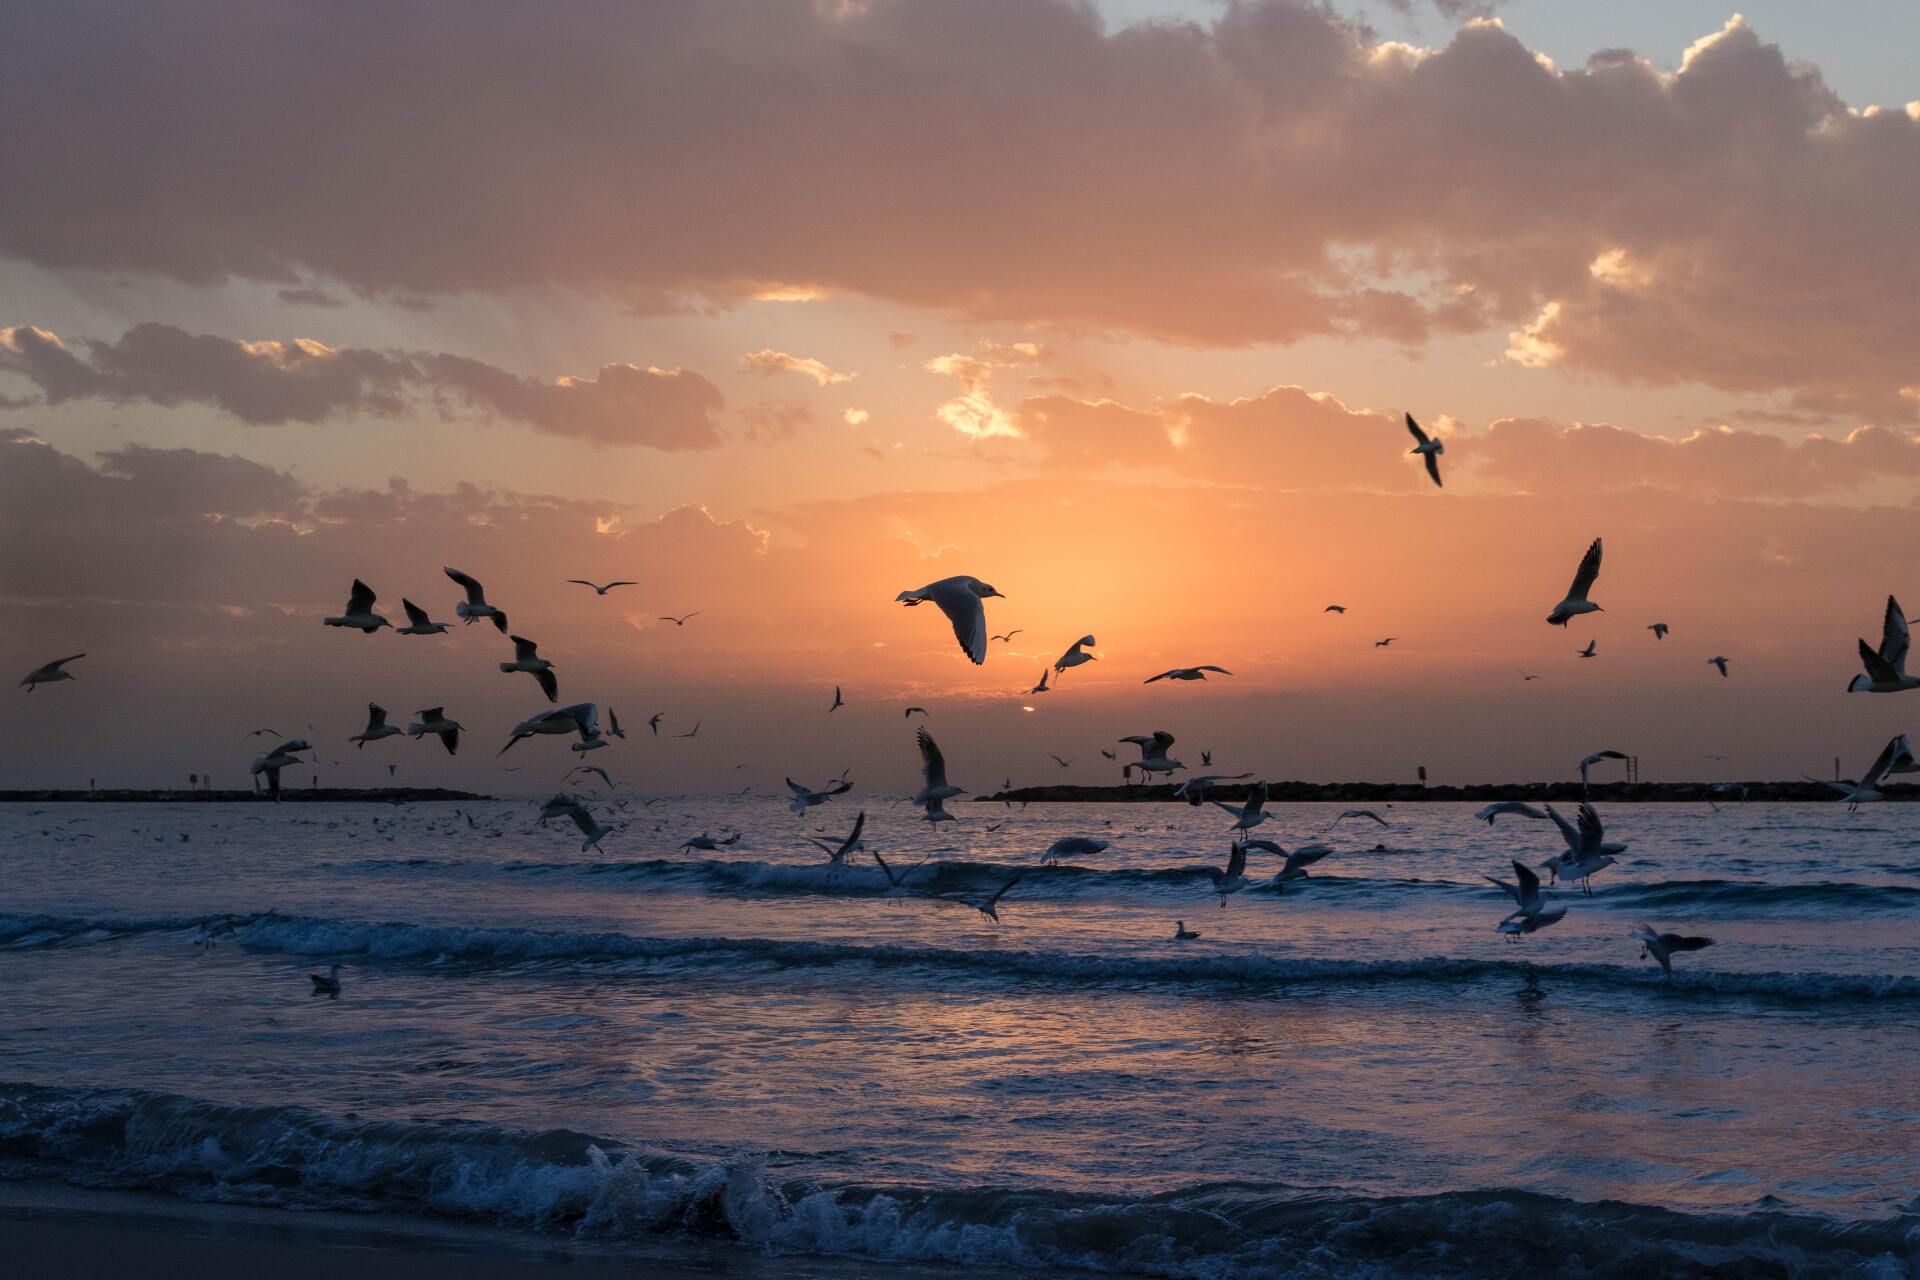 A flock of seagulls are flying over the ocean at sunset.